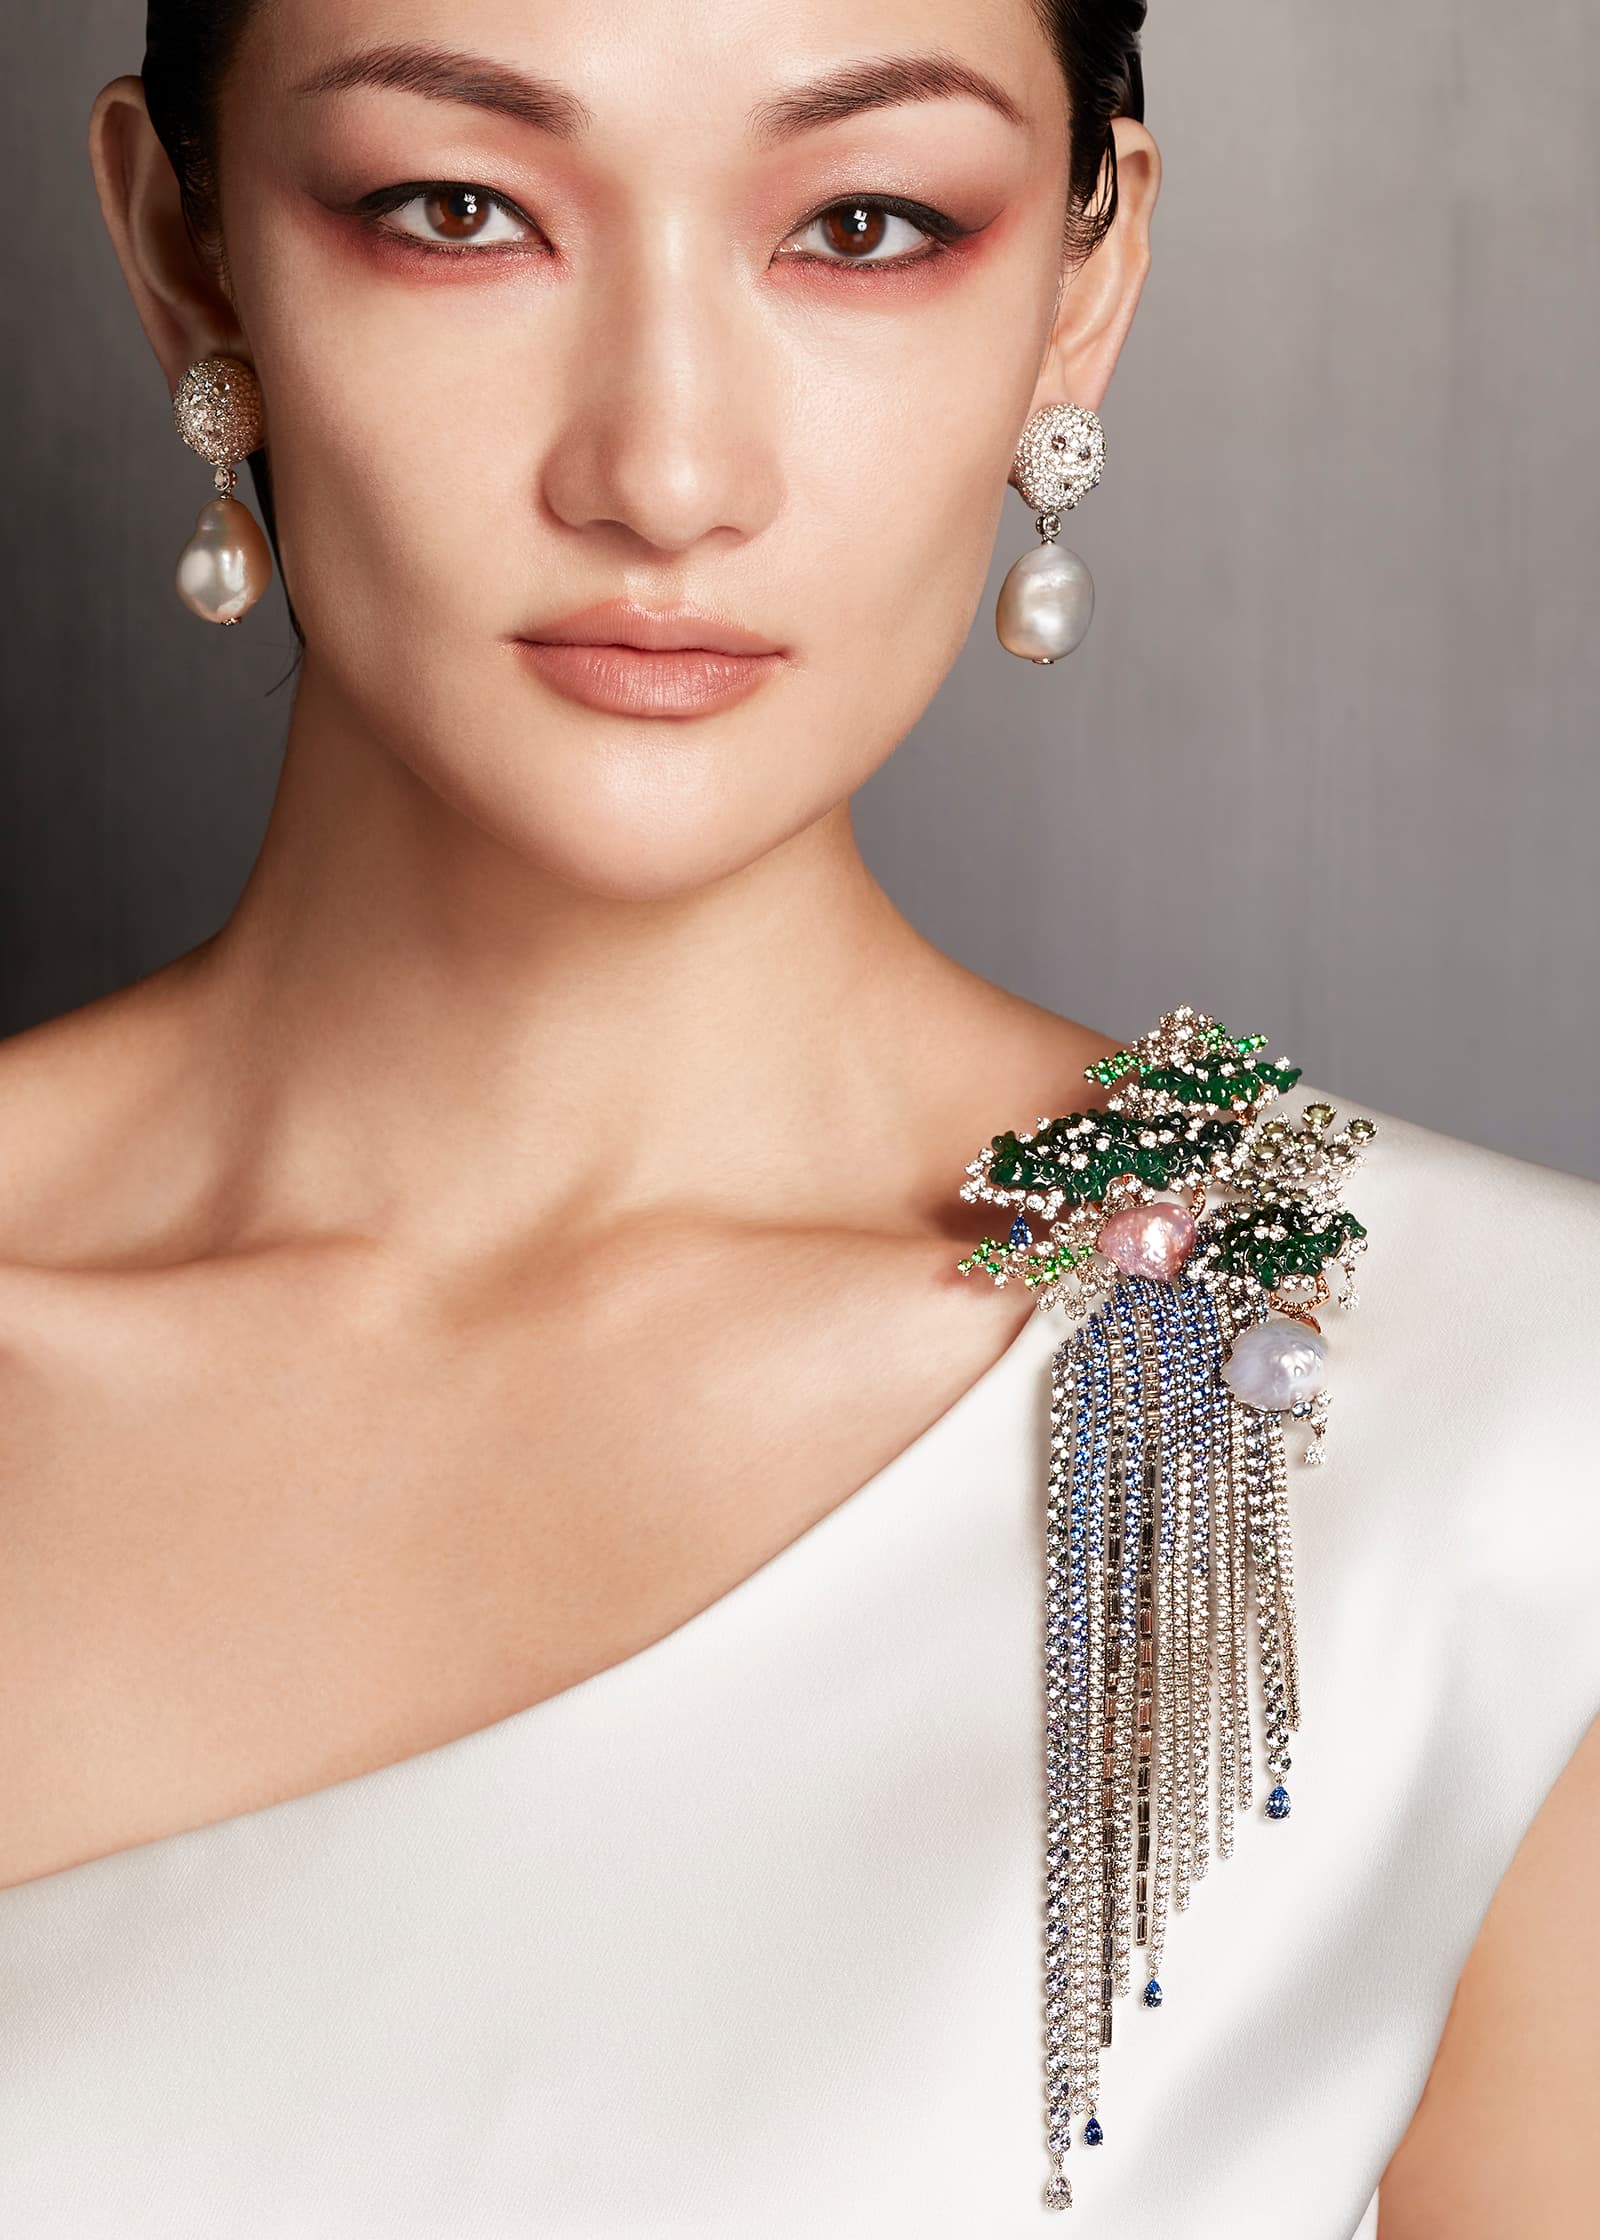 Mikimoto 'The Japanese Sense of Beauty' High Jewellery Collection brooch in 18k white and pink gold with freshwater natural pearls, jadeite, zoisite, emerald, sapphire and diamonds